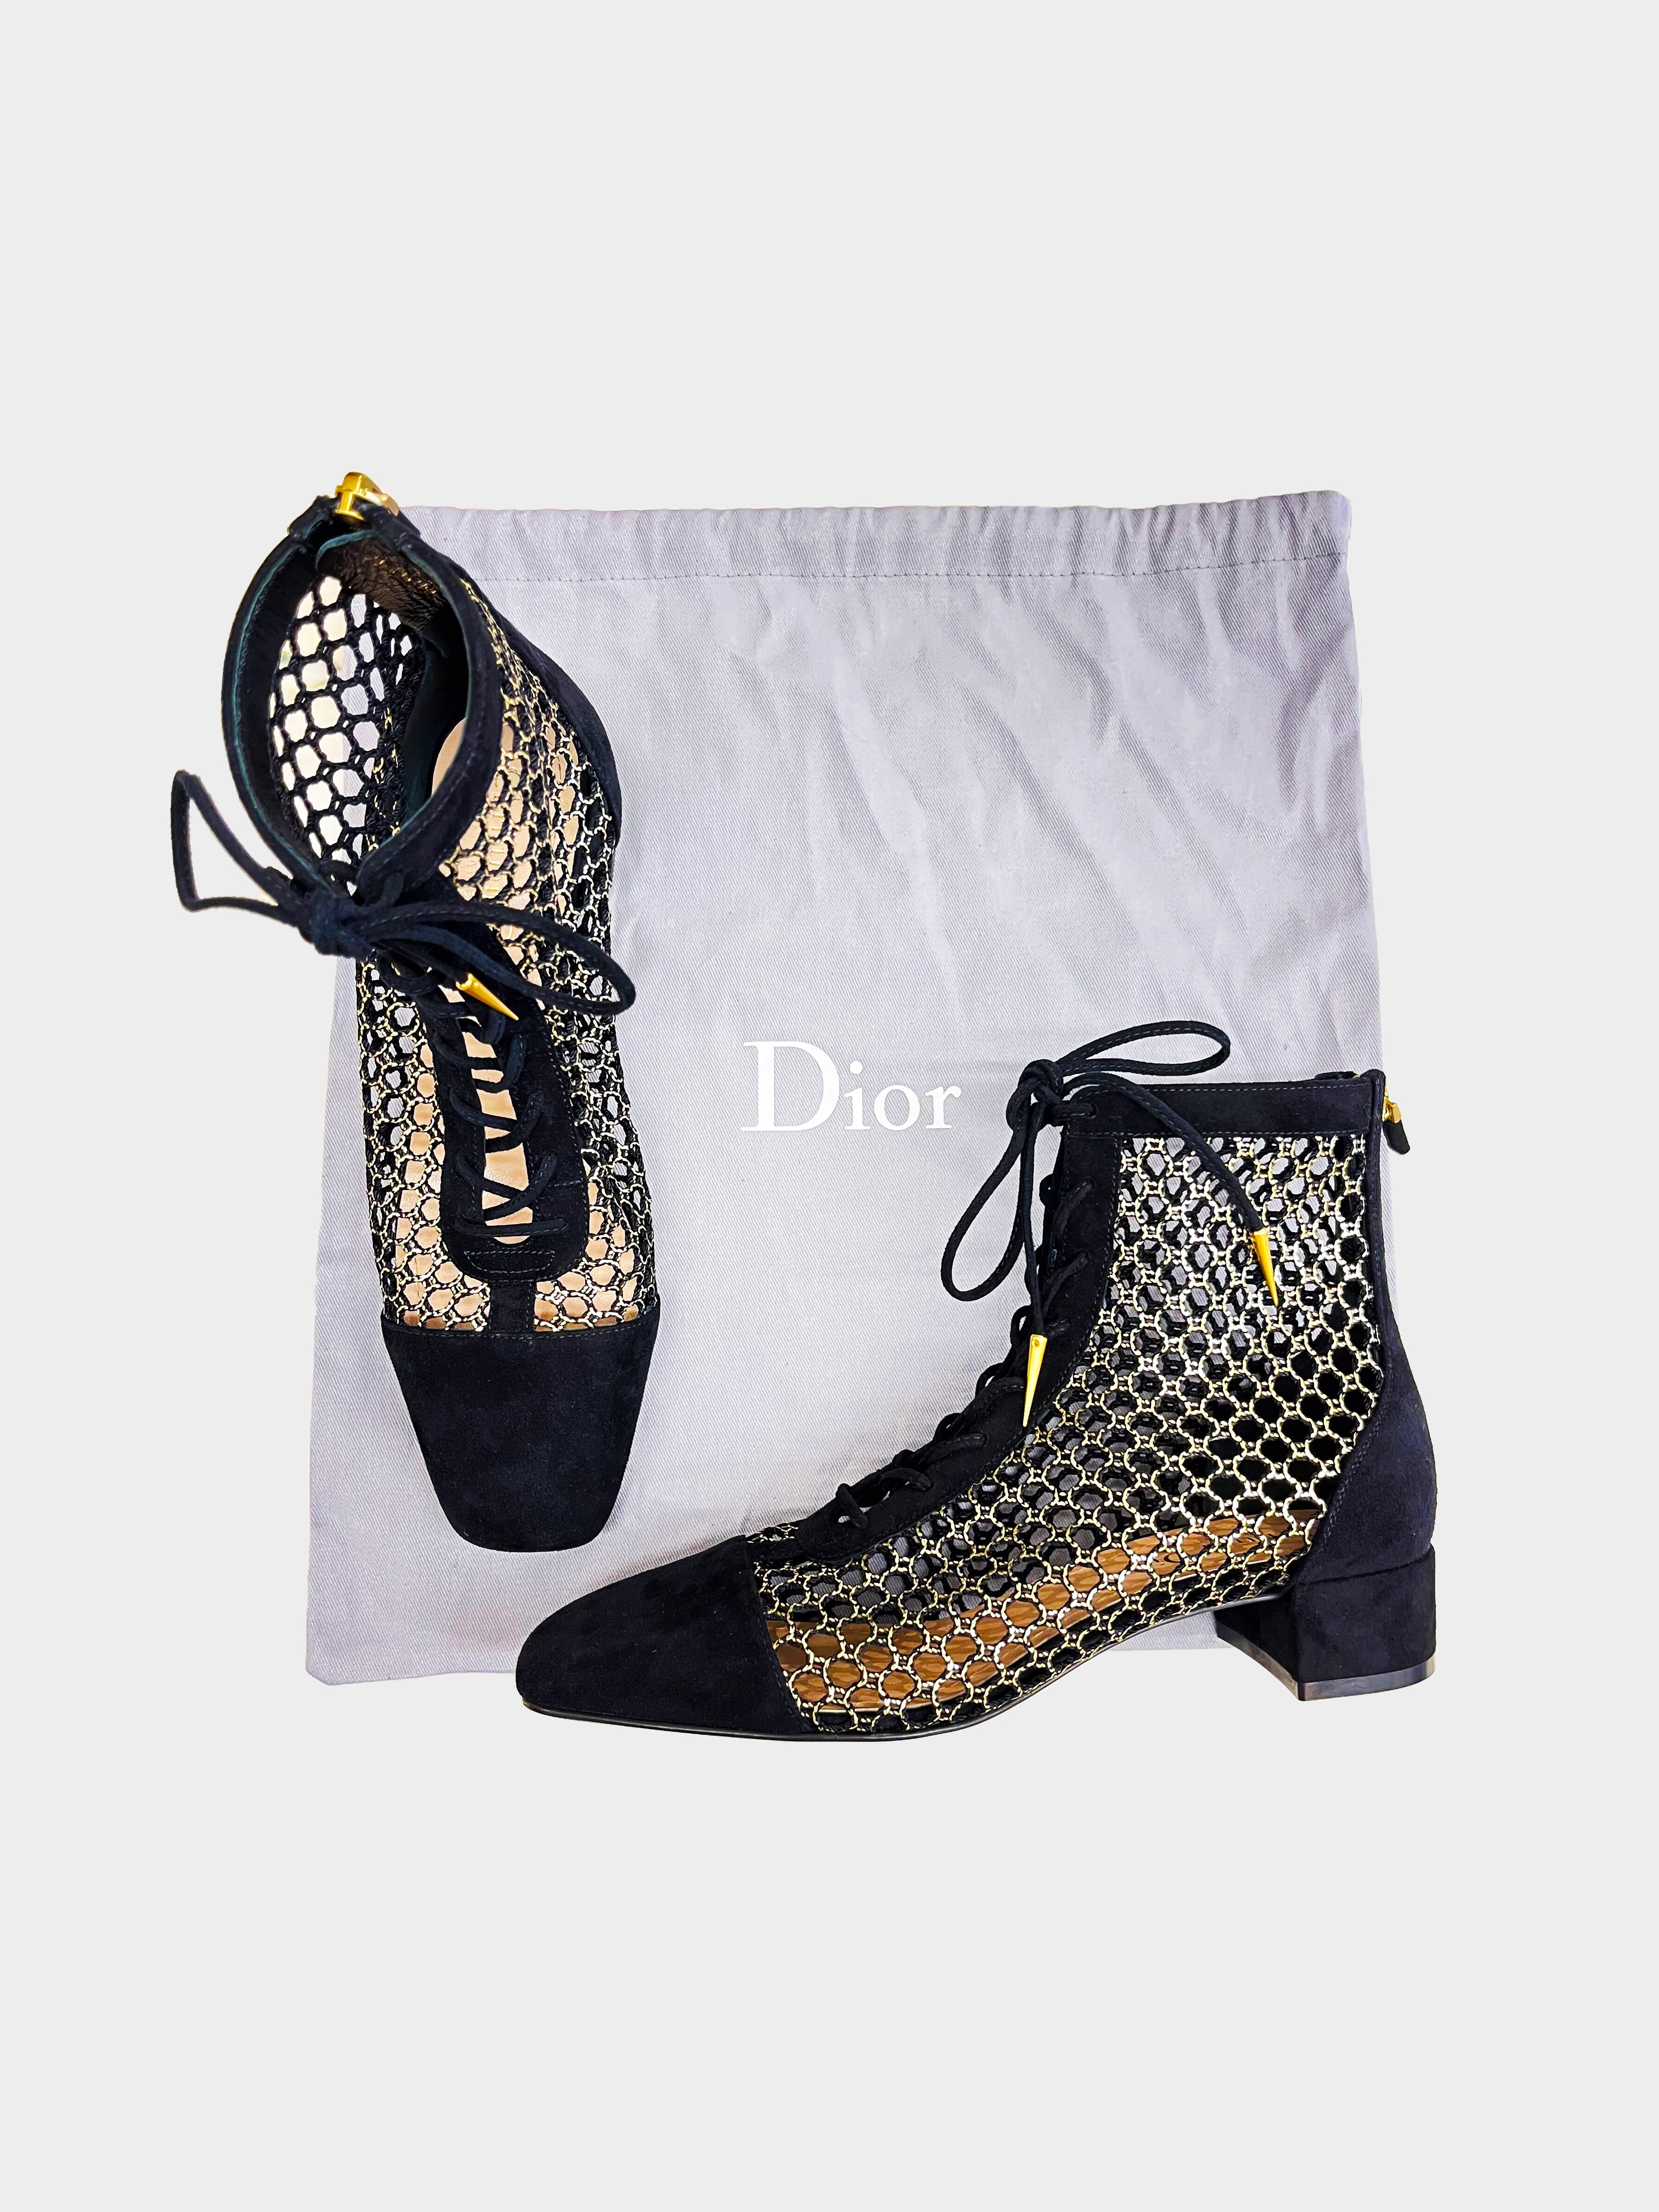 Christian Dior SS 2018 Black and Gold Naughtily-D Ankle Boots